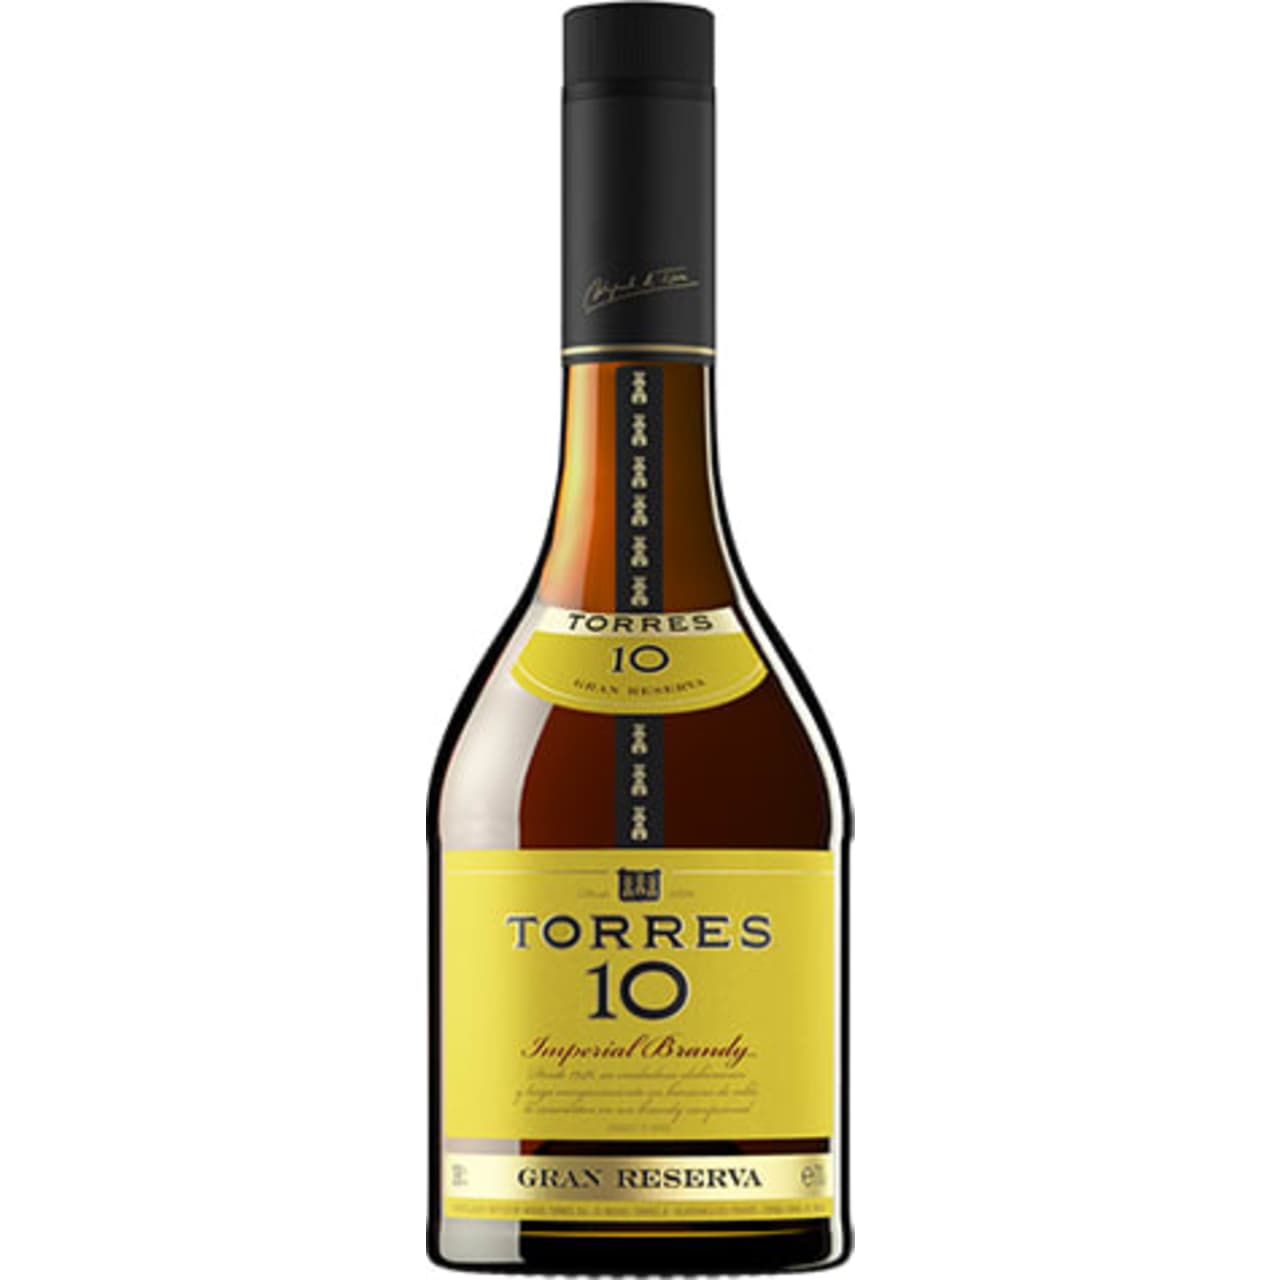 Torres 10 is a solera aged Spanish brandy aged using a solera and features a rich, intense bouquet.